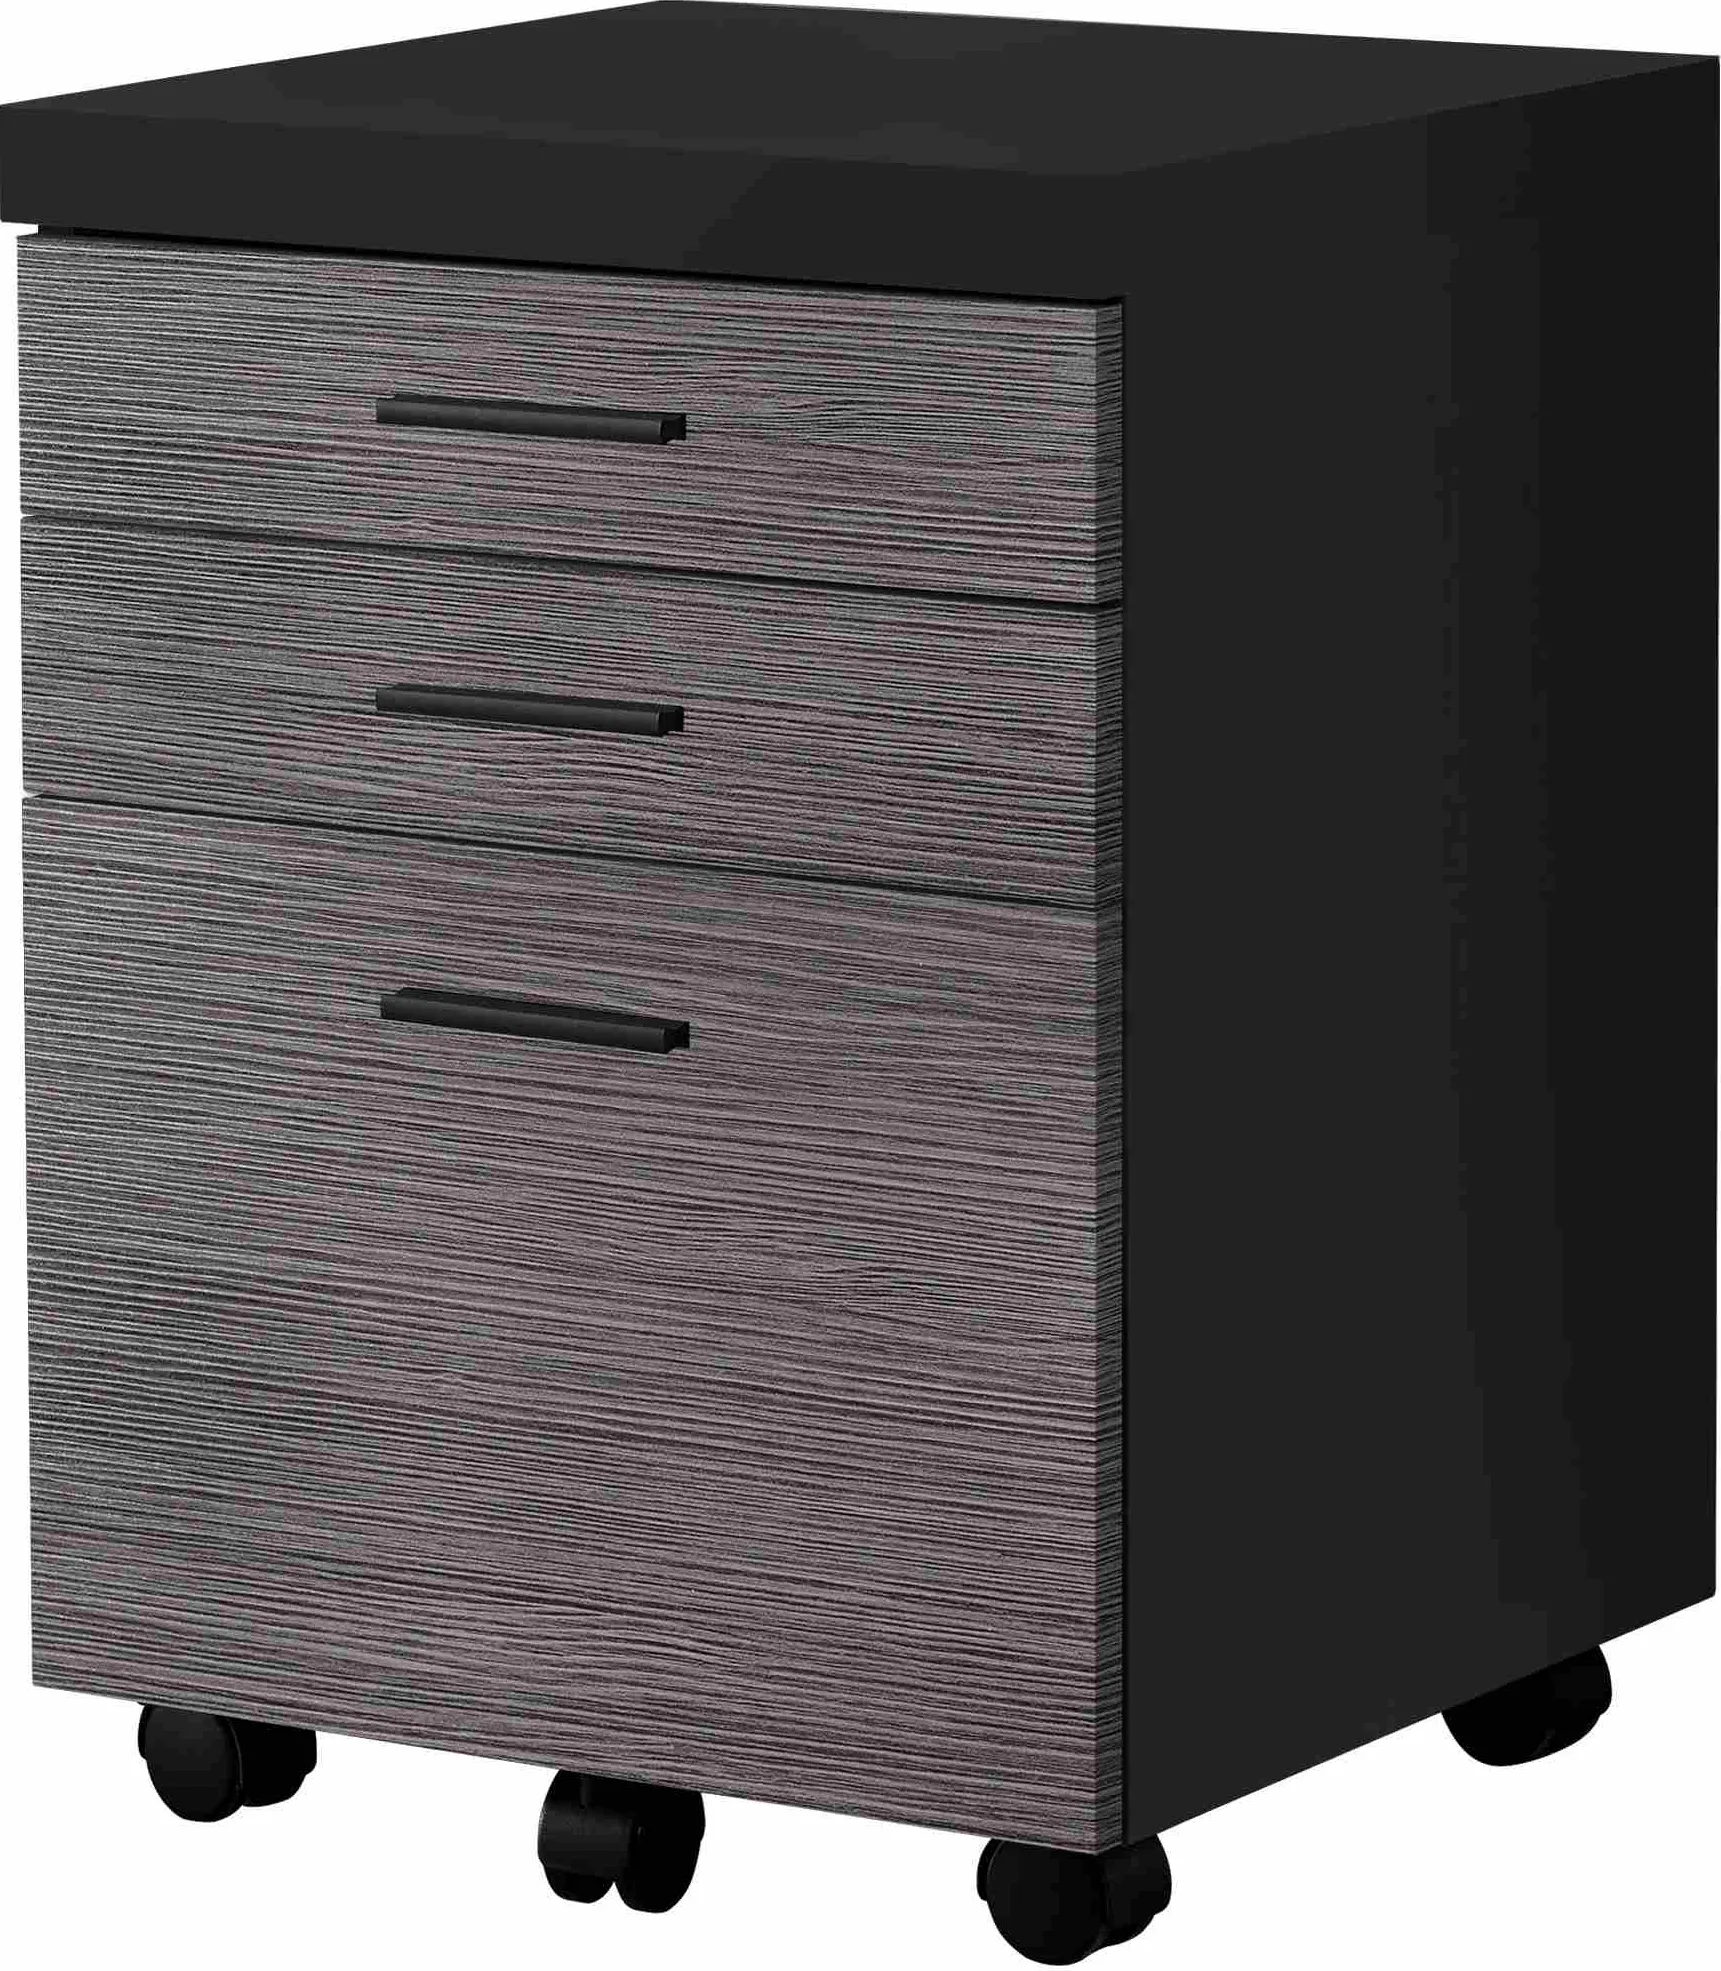 File Cabinet, Rolling Mobile, Storage Drawers, Printer Stand, Office, Work, Laminate, Black, Grey, Contemporary, Modern